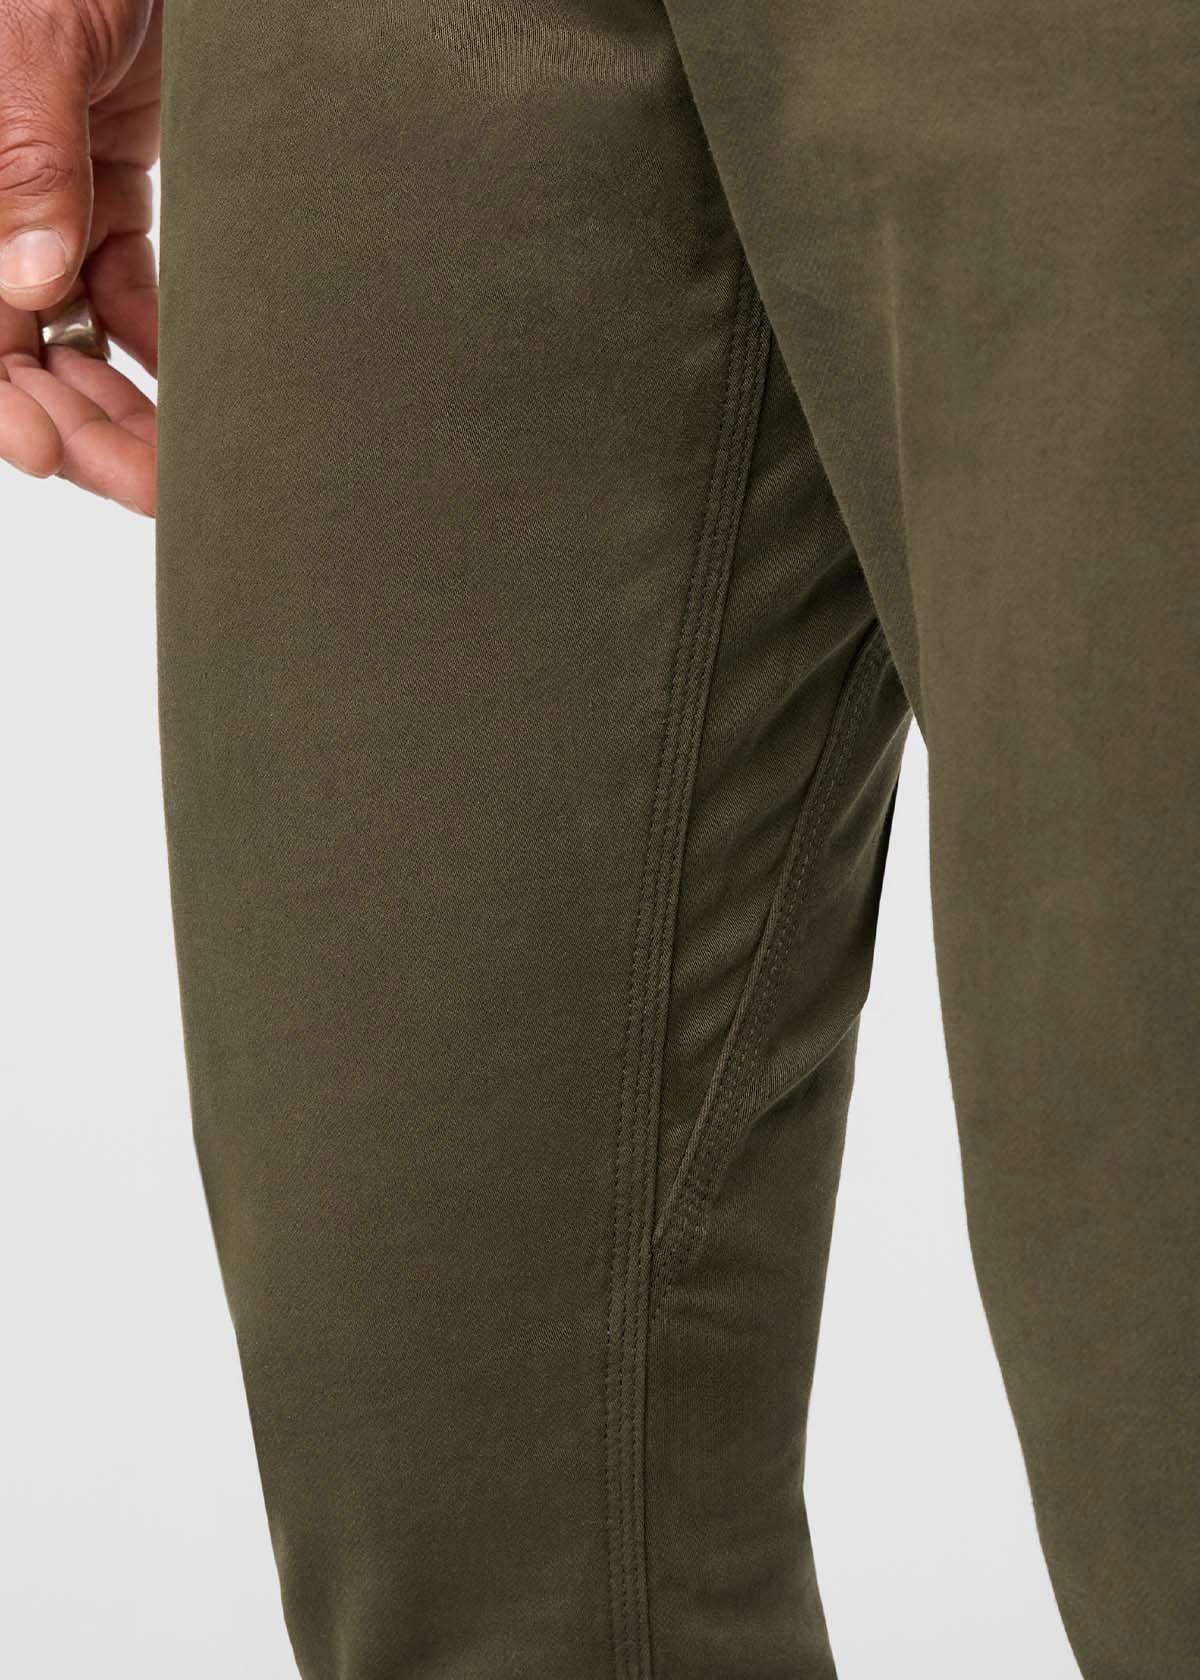 Medium - Womens Knit Mid-Rise Jogger Pants - All in Motion - Olive